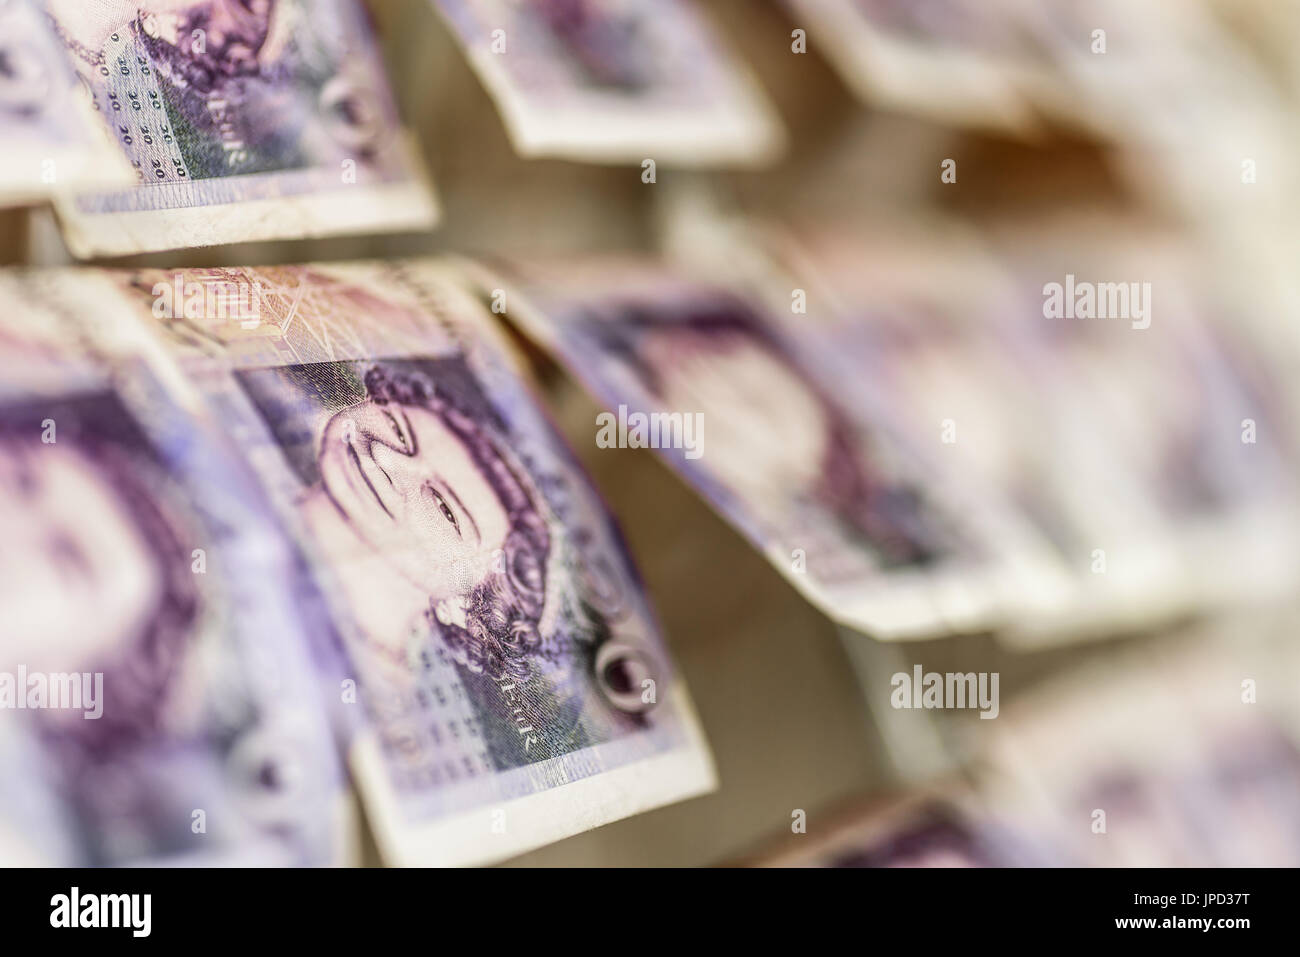 British Sterling Pounds Notes On Clothes Dryer. Money Laundering Concept. Stock Photo